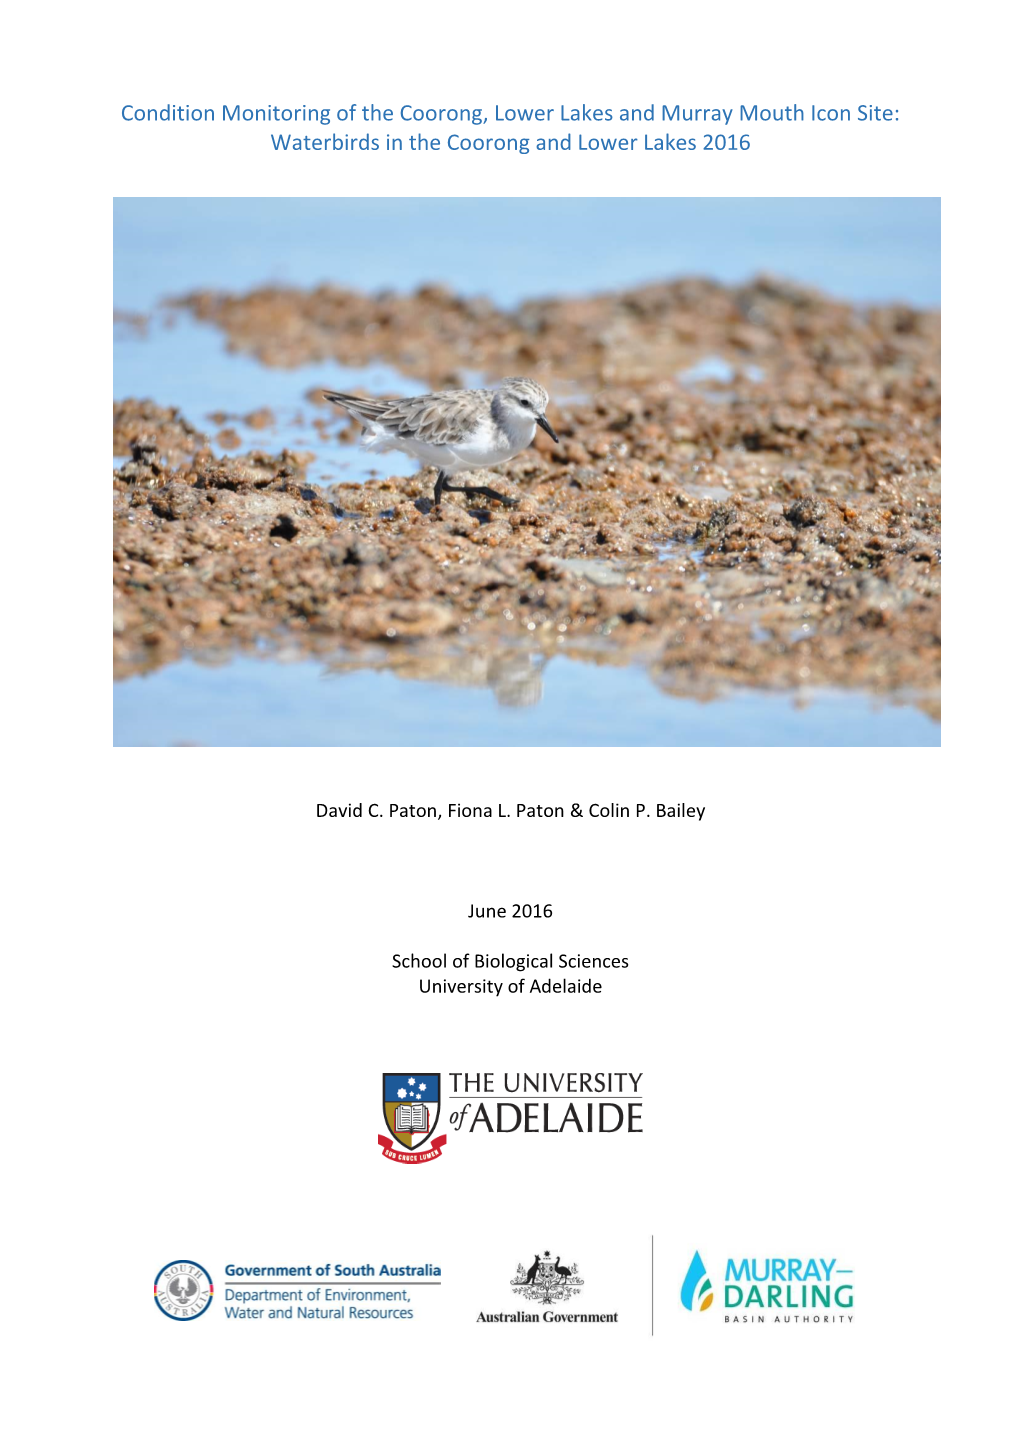 Condition Monitoring of the Coorong, Lower Lakes and Murray Mouth Icon Site: Waterbirds in the Coorong and Lower Lakes 2016